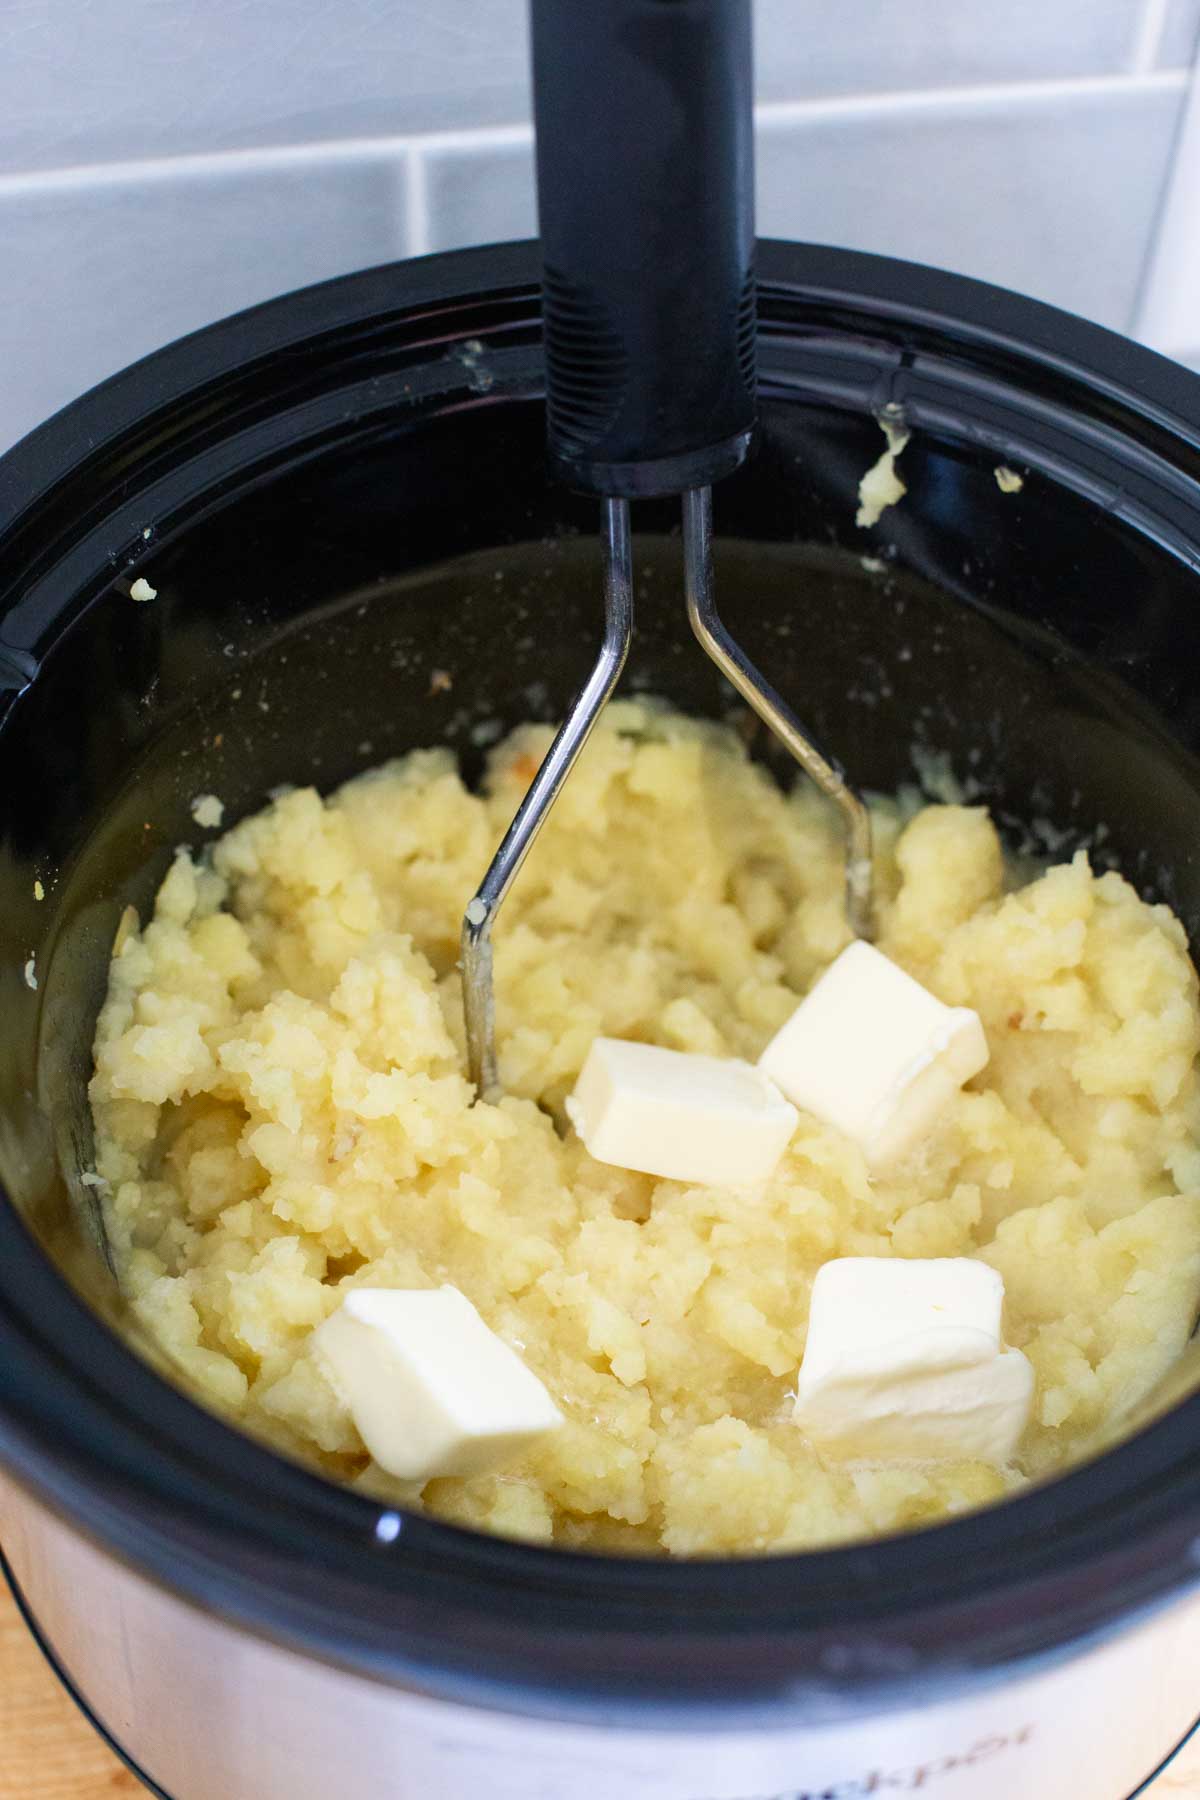 The cooked potatoes are being mashed by a masher and cubes of butter are melting into the potatoes.